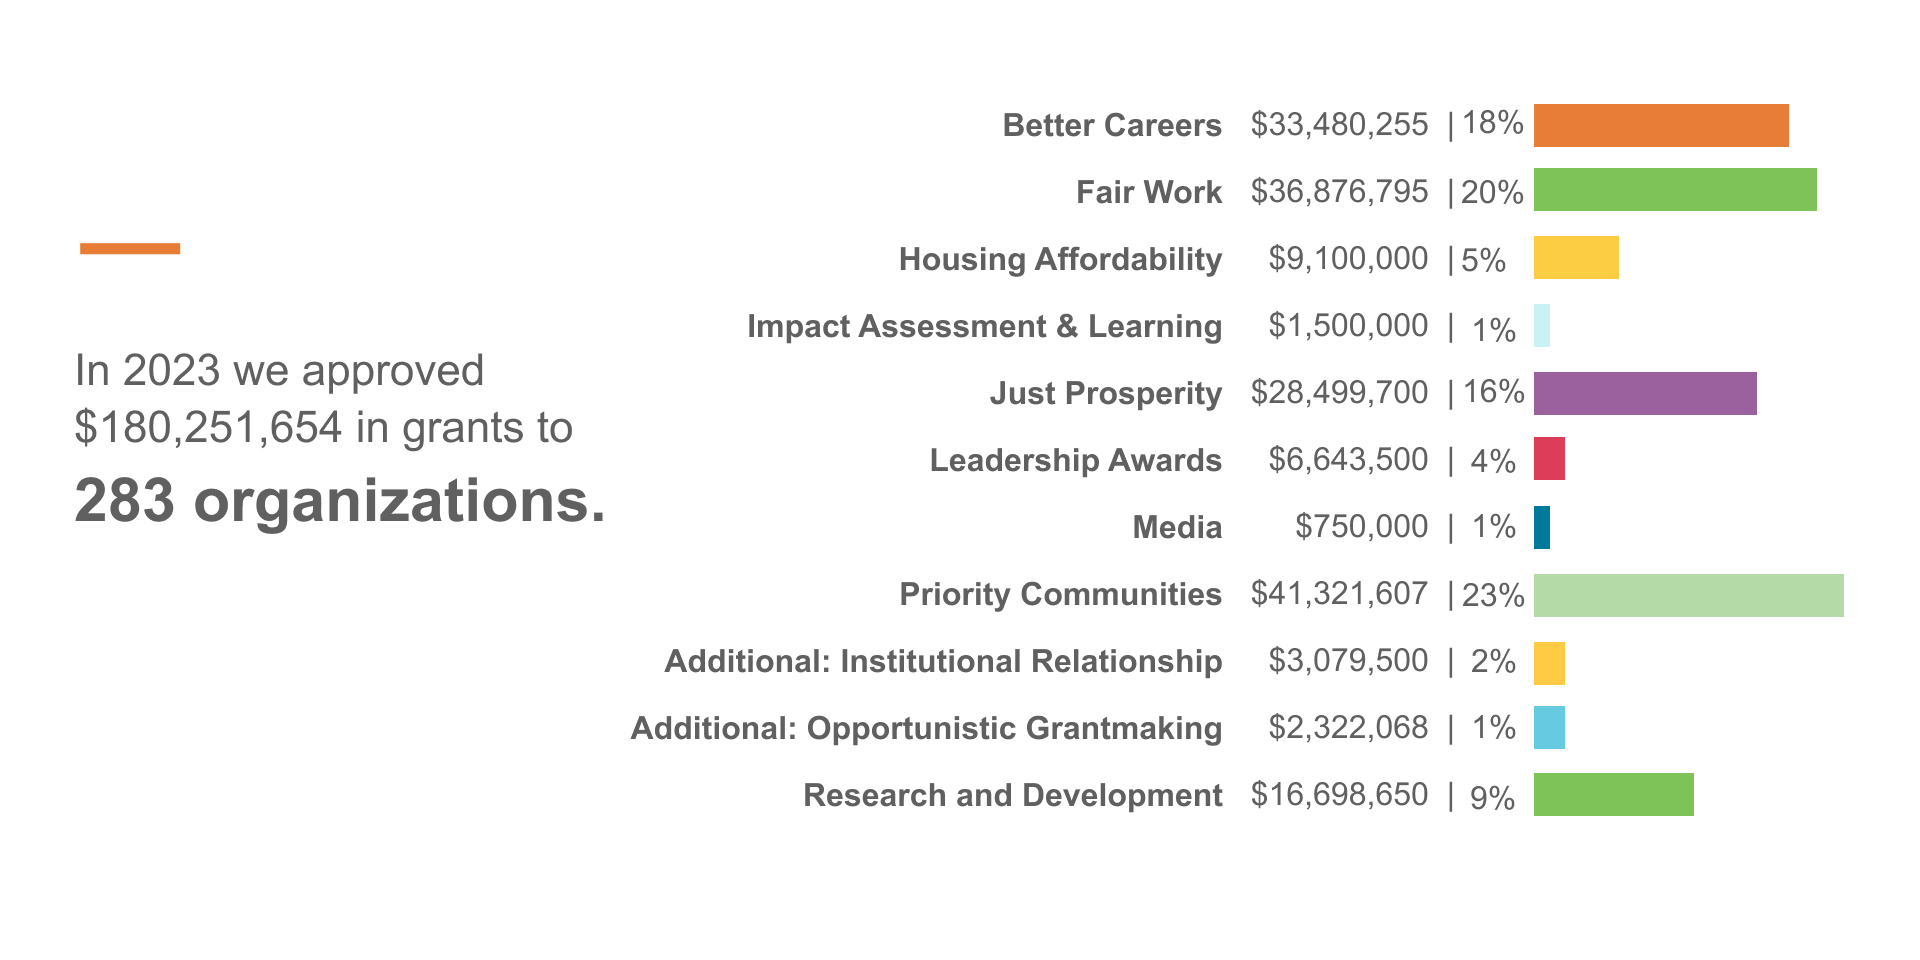 In 2022 we approved $187,300,000 in grants to 380 organizations.